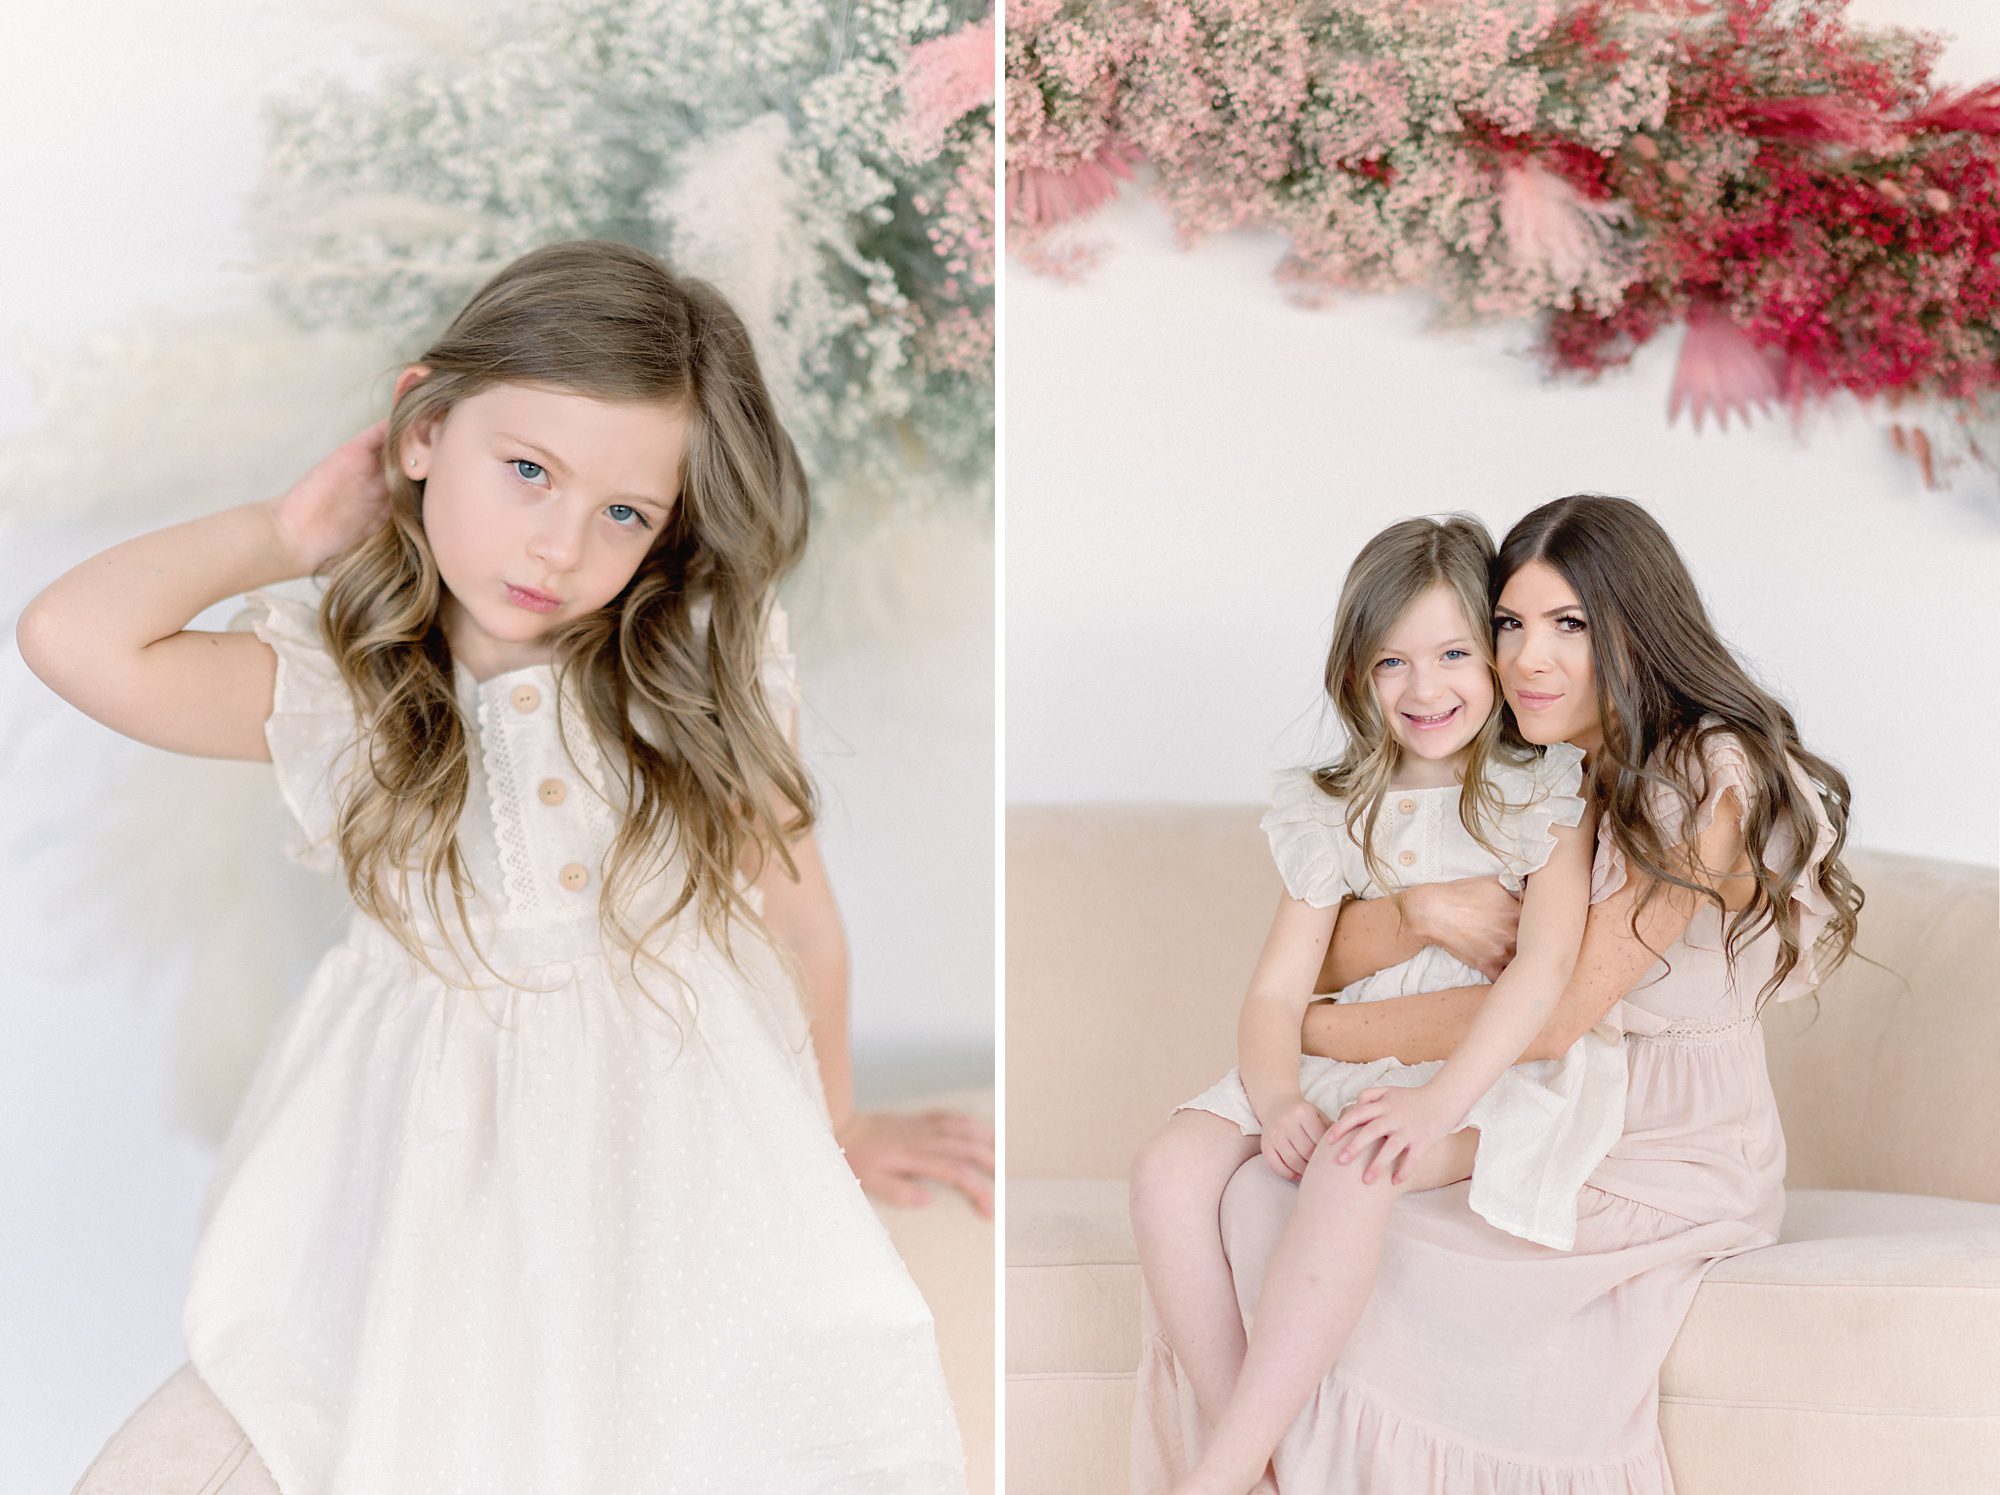 A 6 yr old girl and her mom get photos taken around Valentine's Day in a bright white studio in Denver, CO with a beautiful pink floral backdrop.